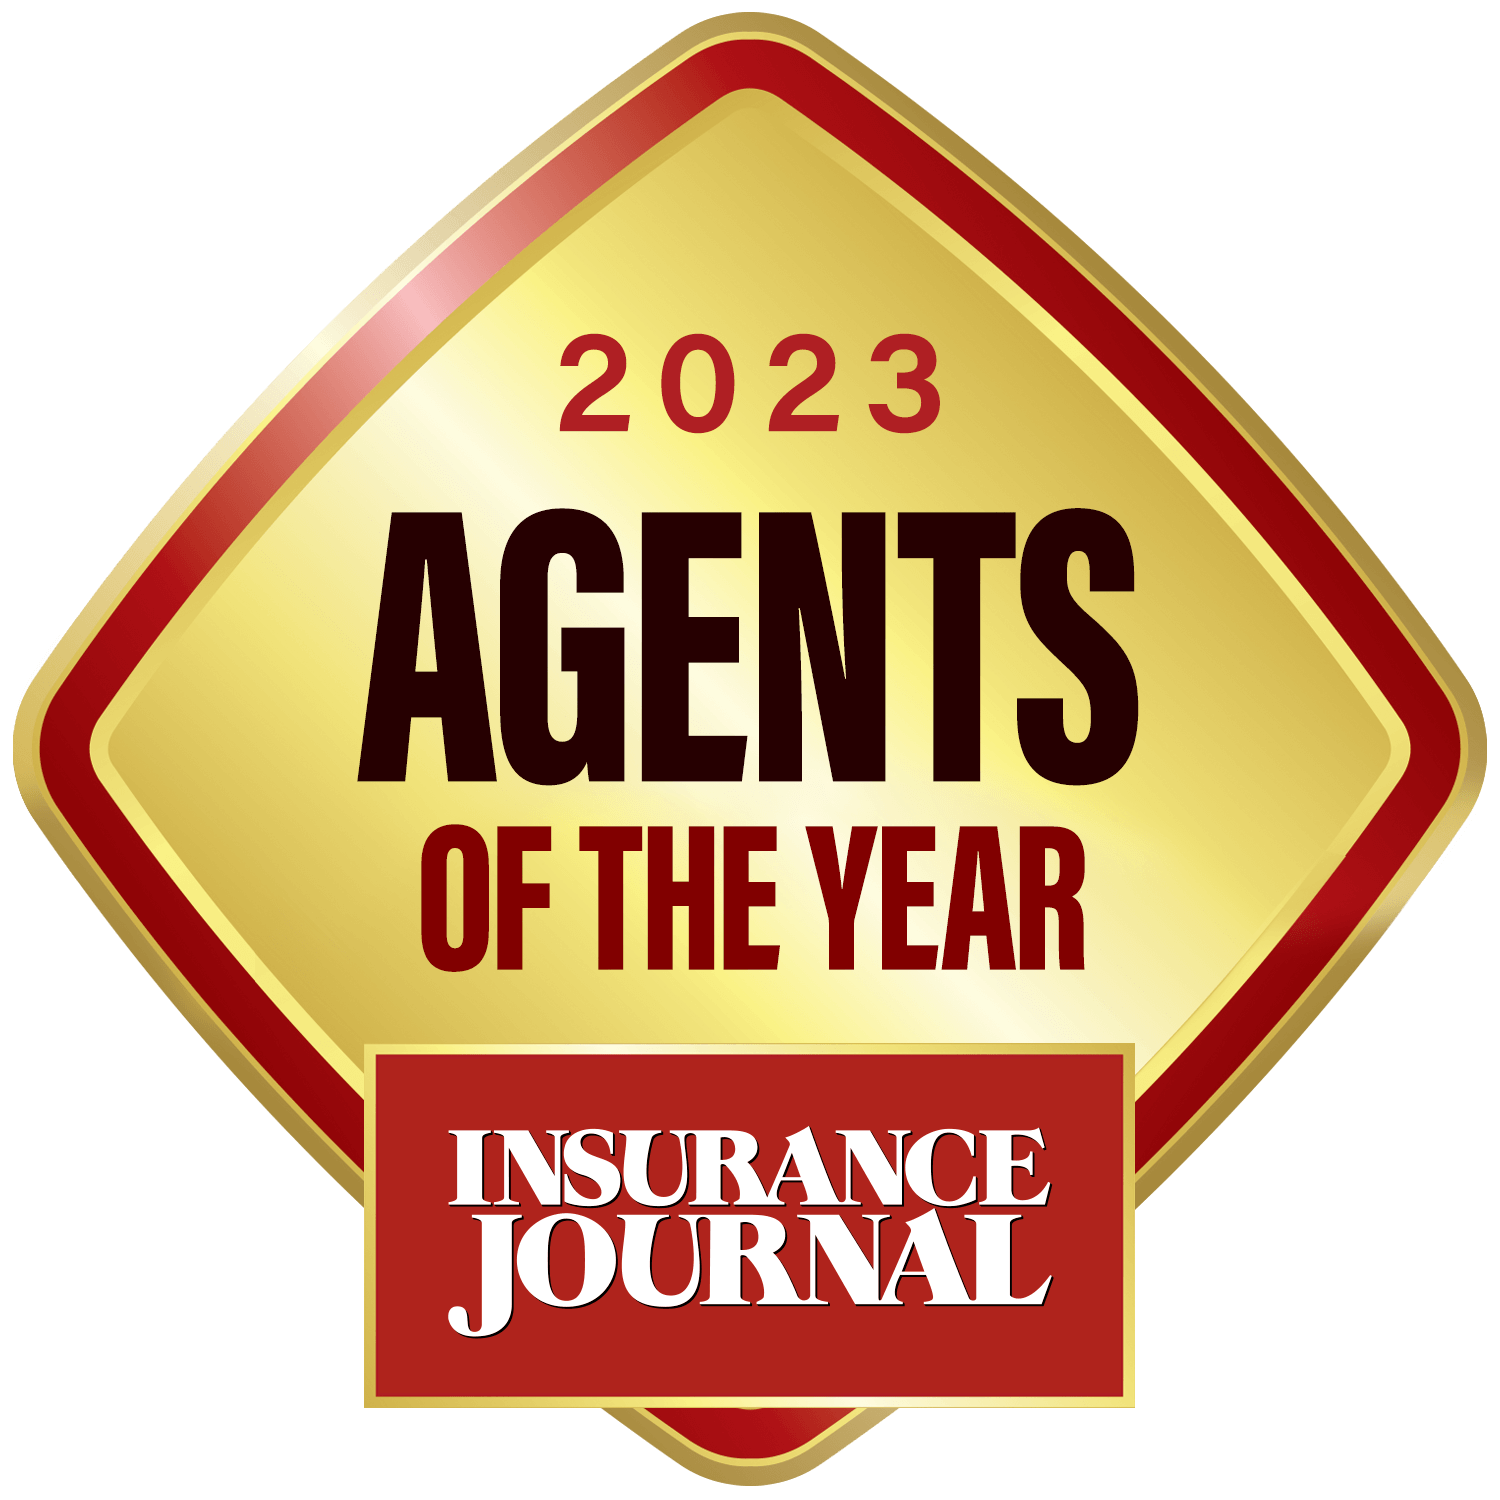 Digital badge for the 2023 Insurance Agents of the Year Award, featuring intricate design elements that symbolize excellence and achievement in the insurance industry.